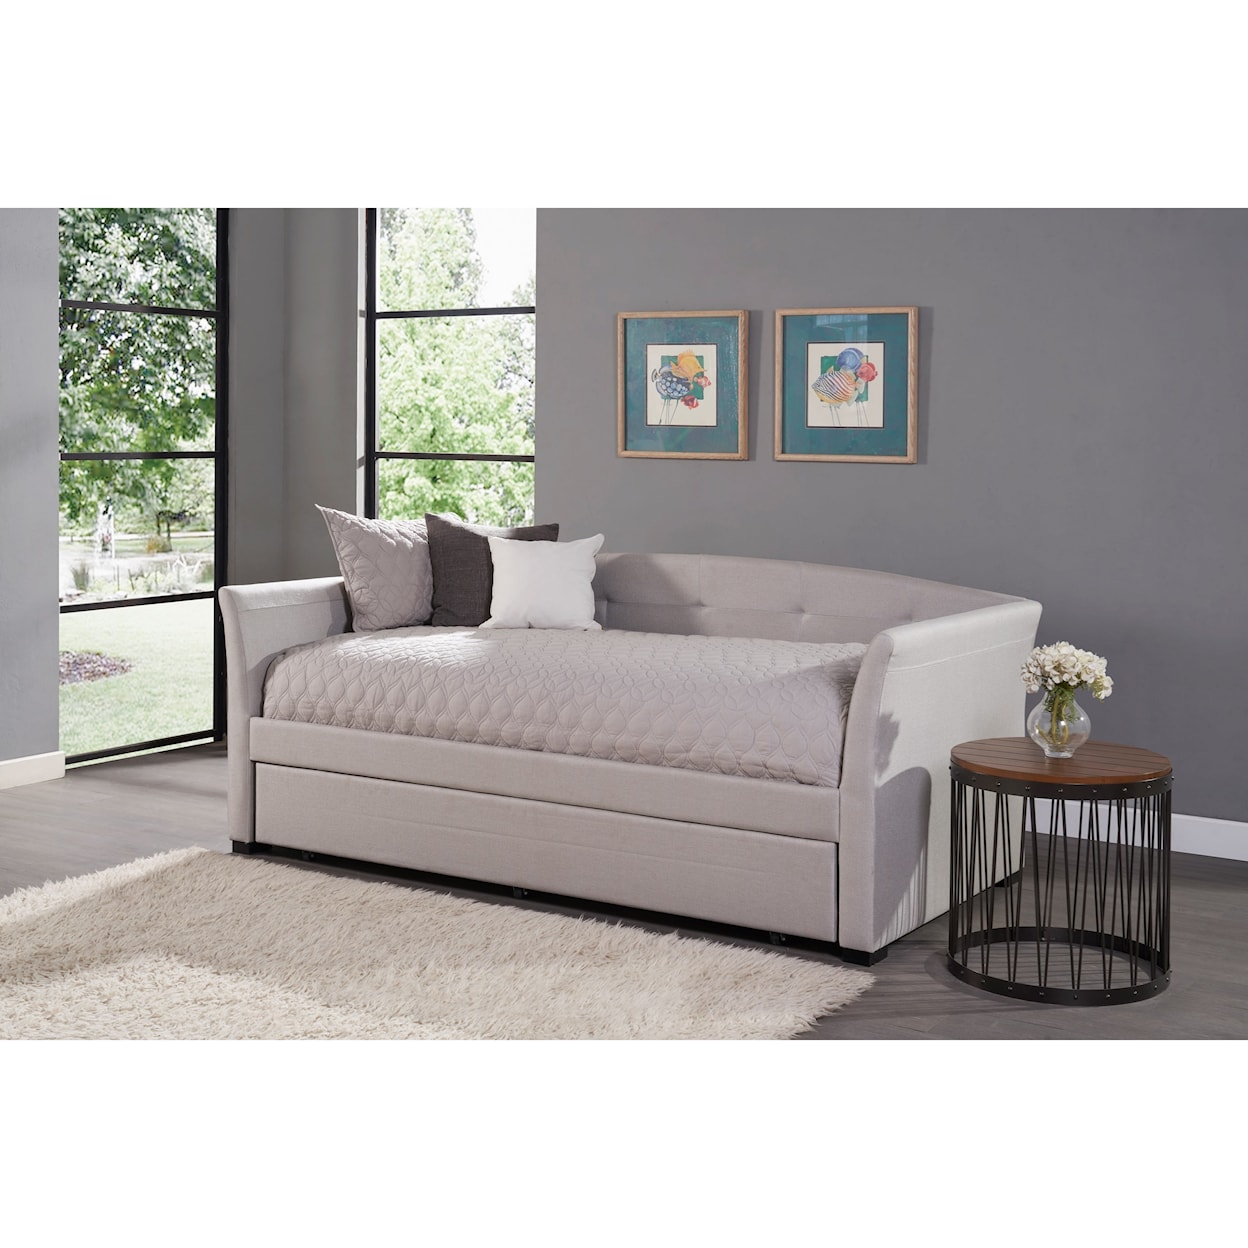 Hillsdale Morgan Upholstered Daybed with Trundle